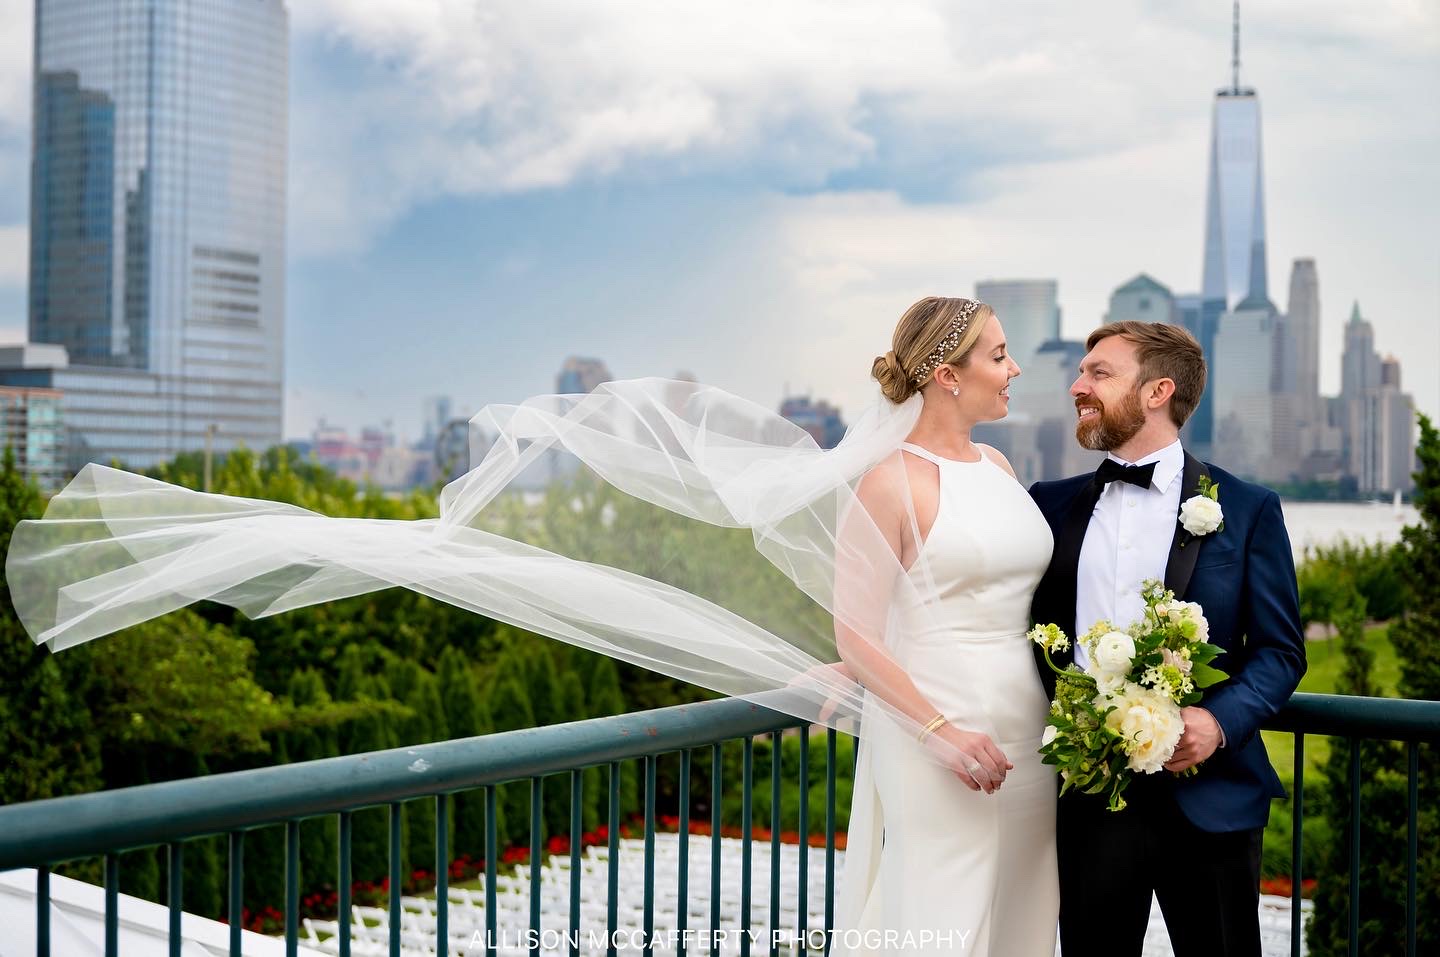 Wedding portrait of a couple standing on the outside patio of Liberty House Restaurant in Jersey City. The bride's long veil is blowing in the wind.